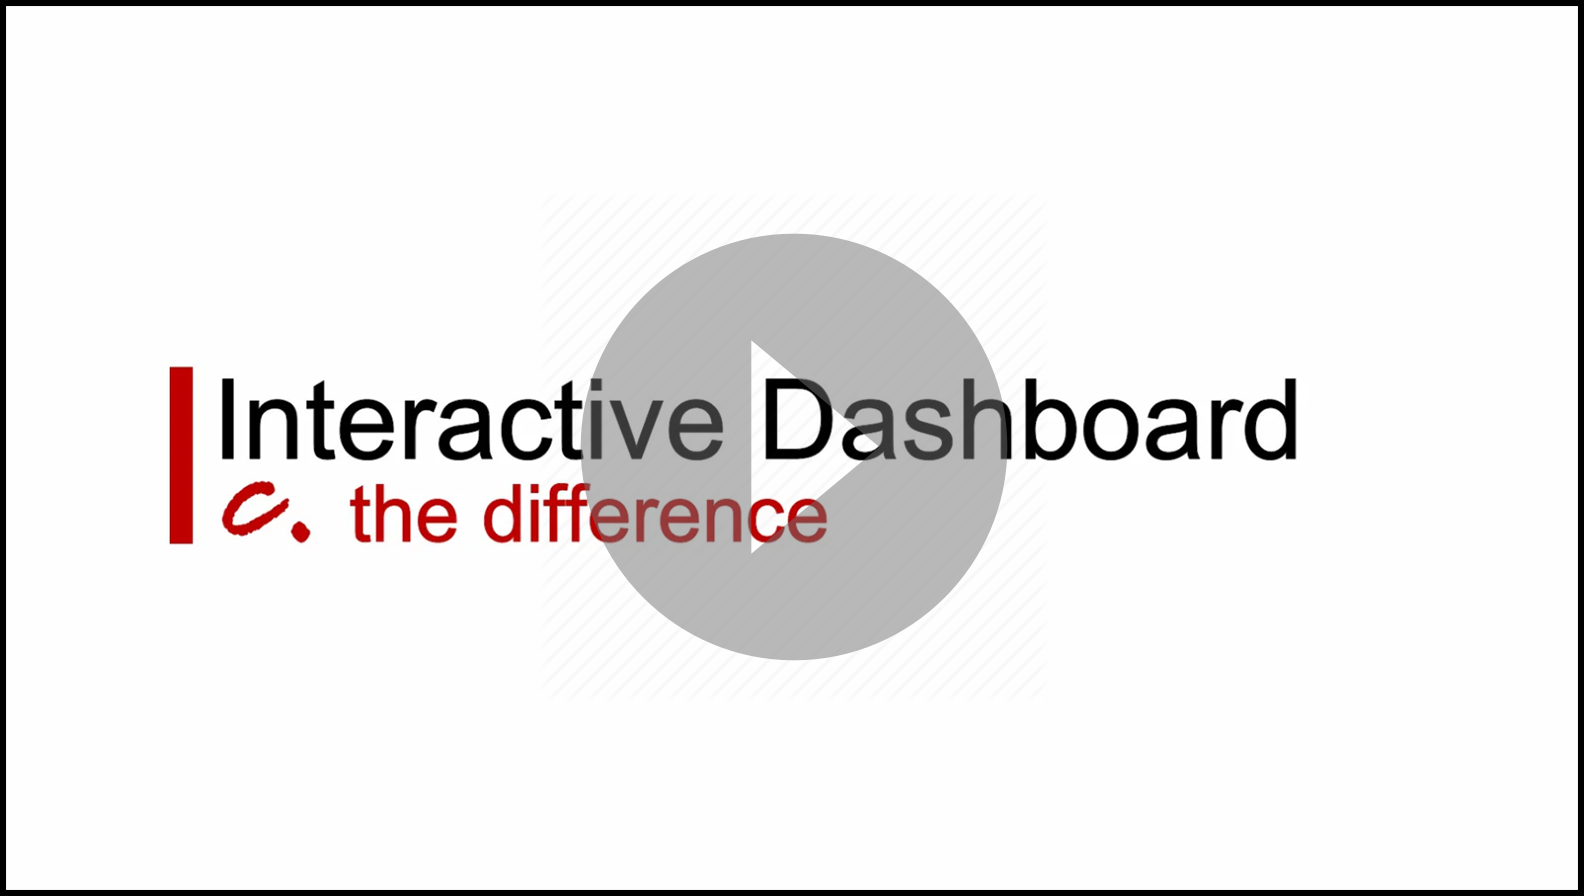 interactive dashboard: c. the difference